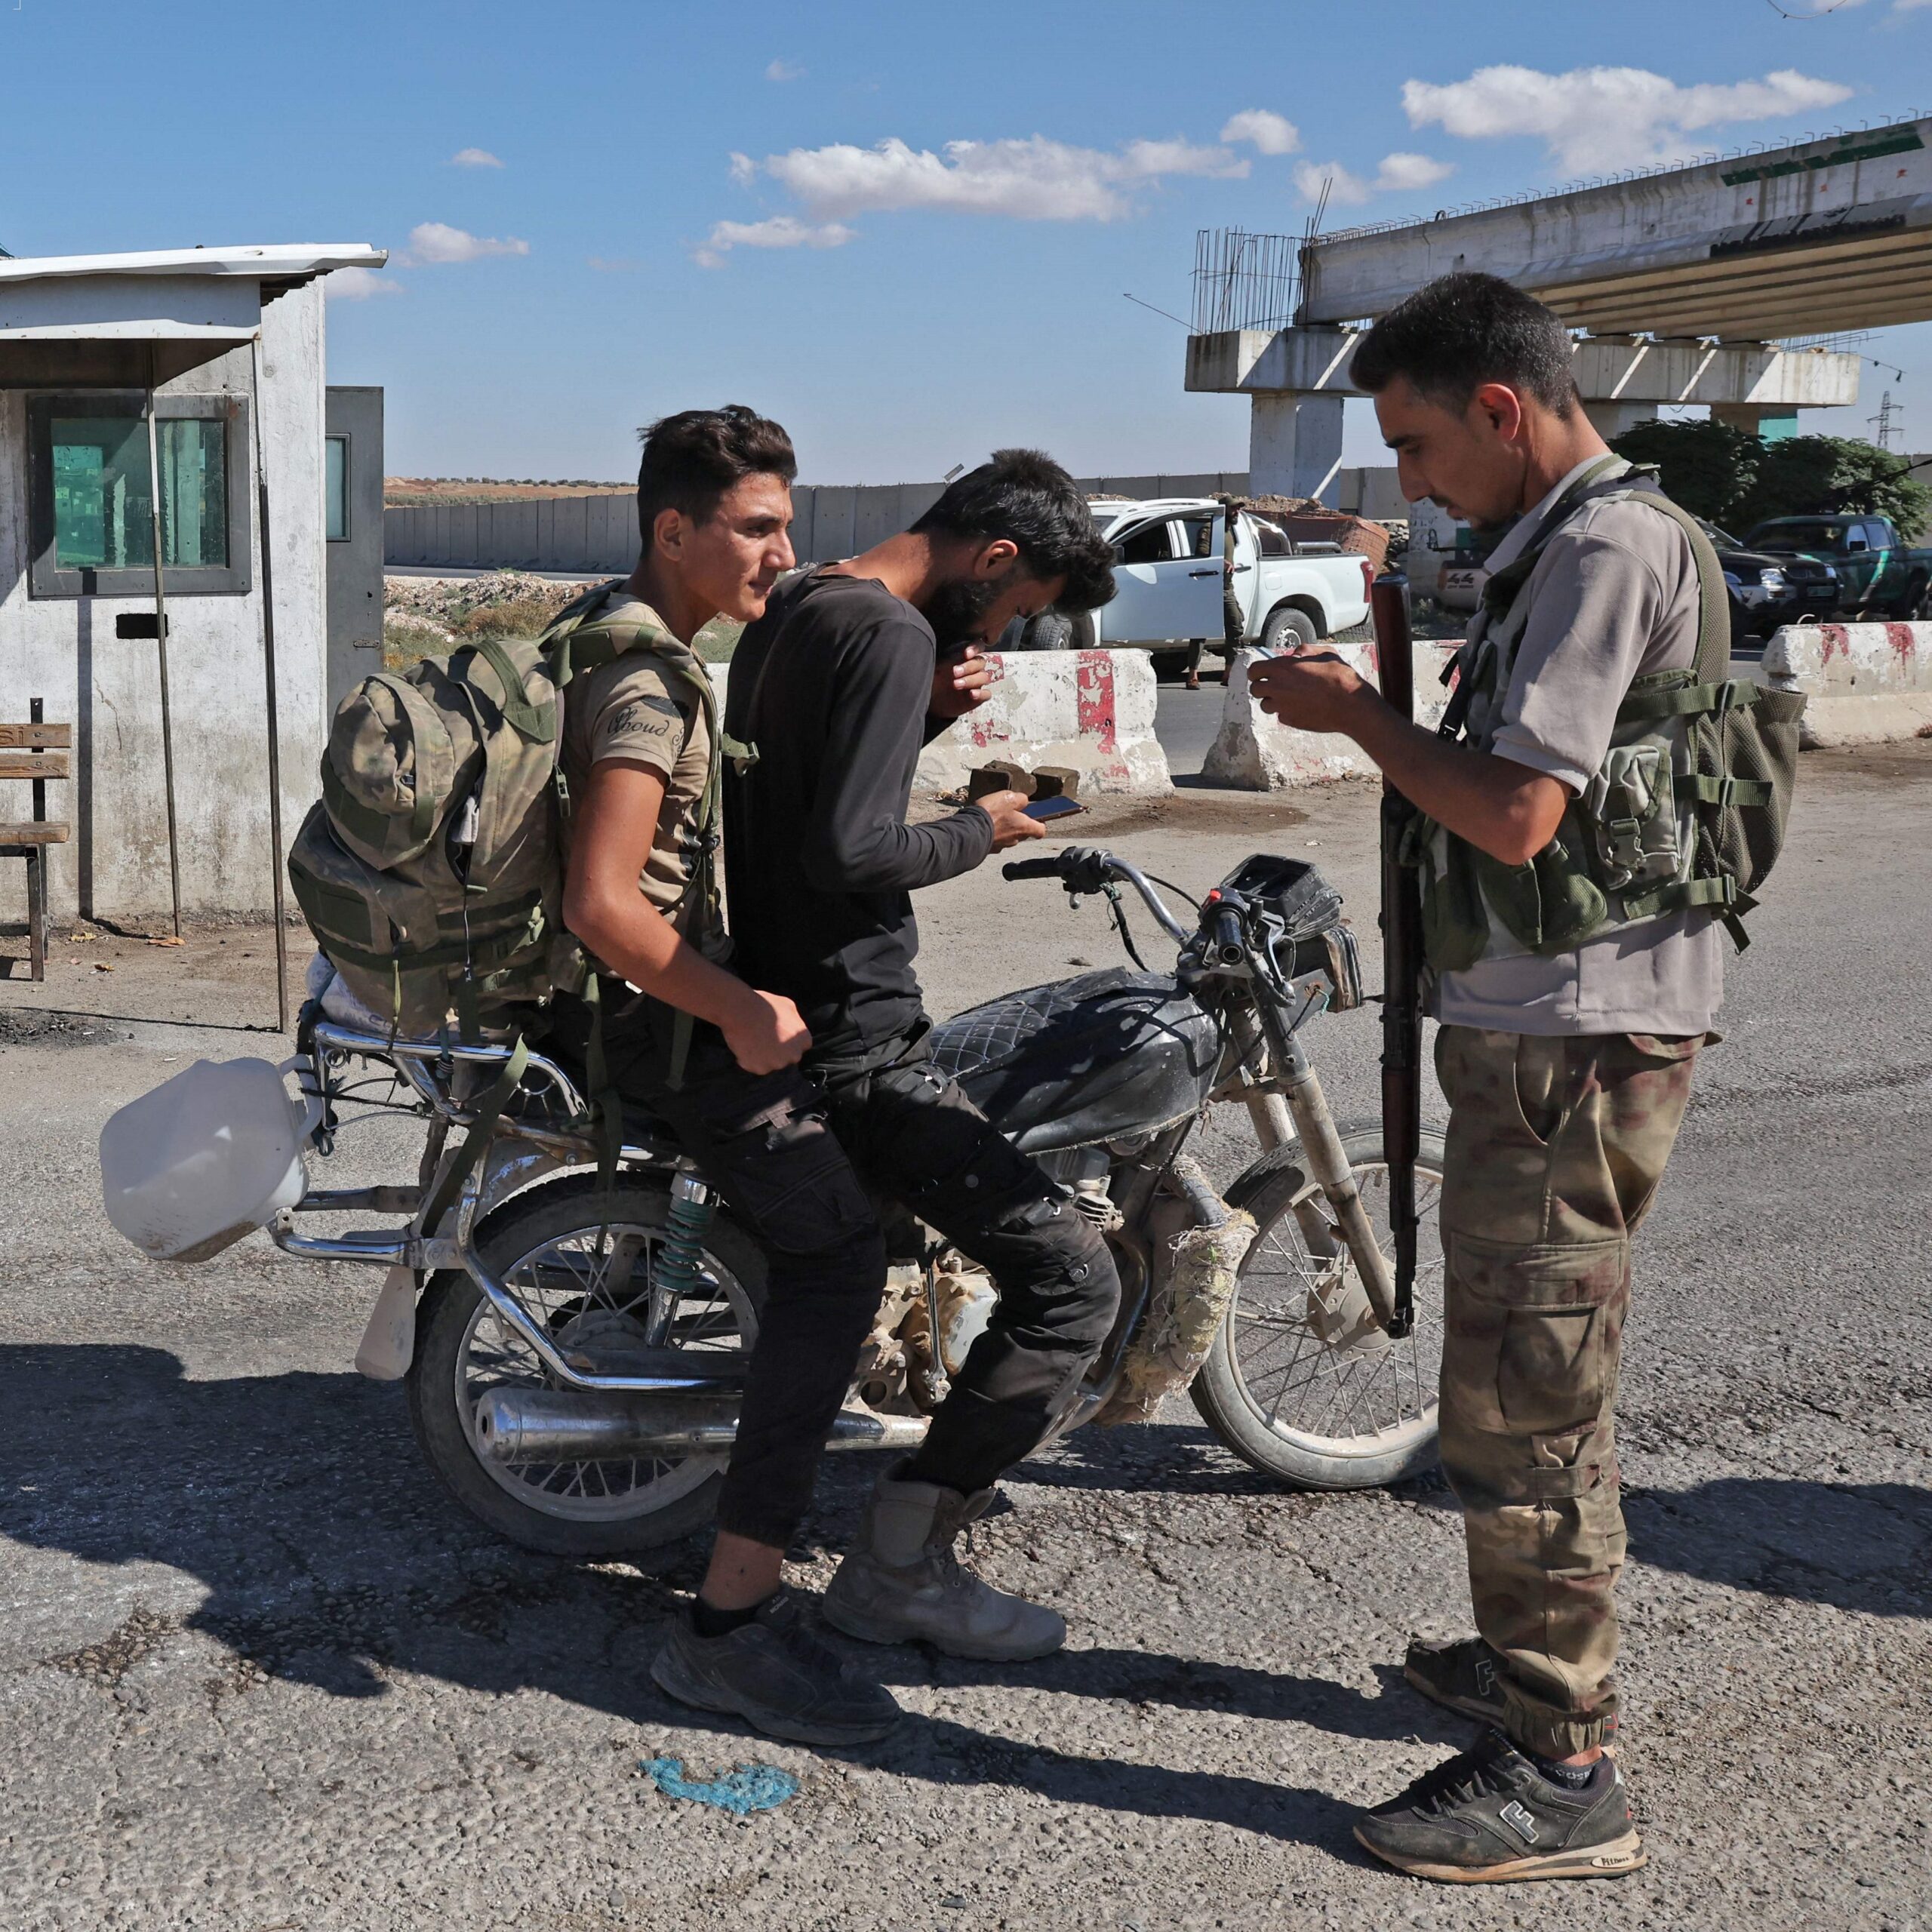 Fighters from the Turkish-backed Free Syrian Army are deployed on a checkpoint in the area of Kafr Jannah on the outskirts of the Syrian town of Afrin on 19 October 2022